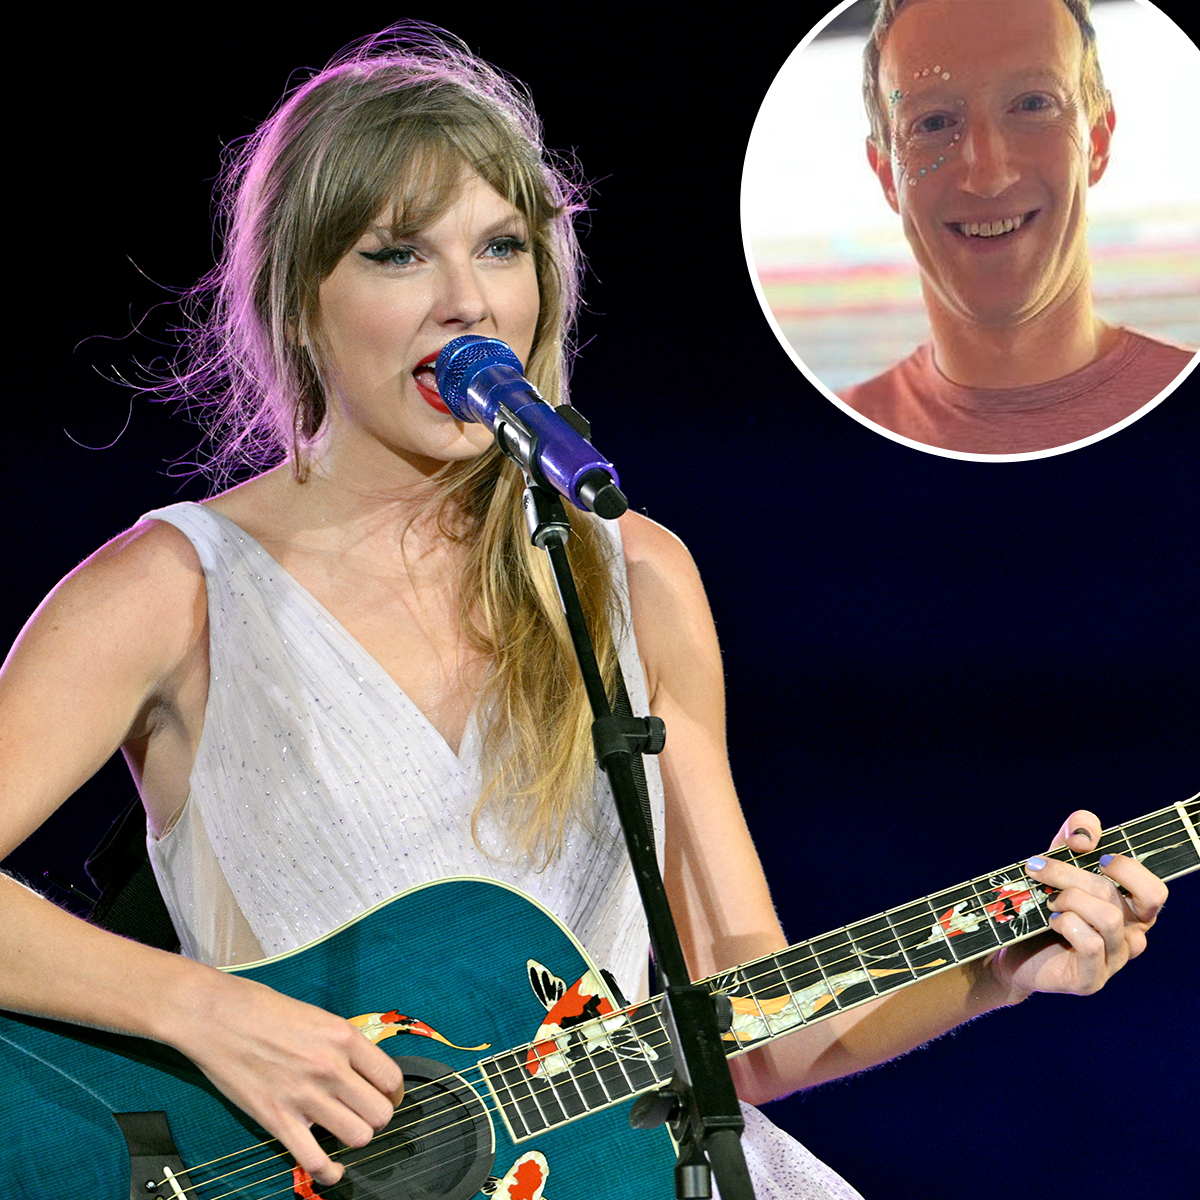 Mark Zuckerberg Is All Smiles as He Takes Kids to Taylor Swift Concert